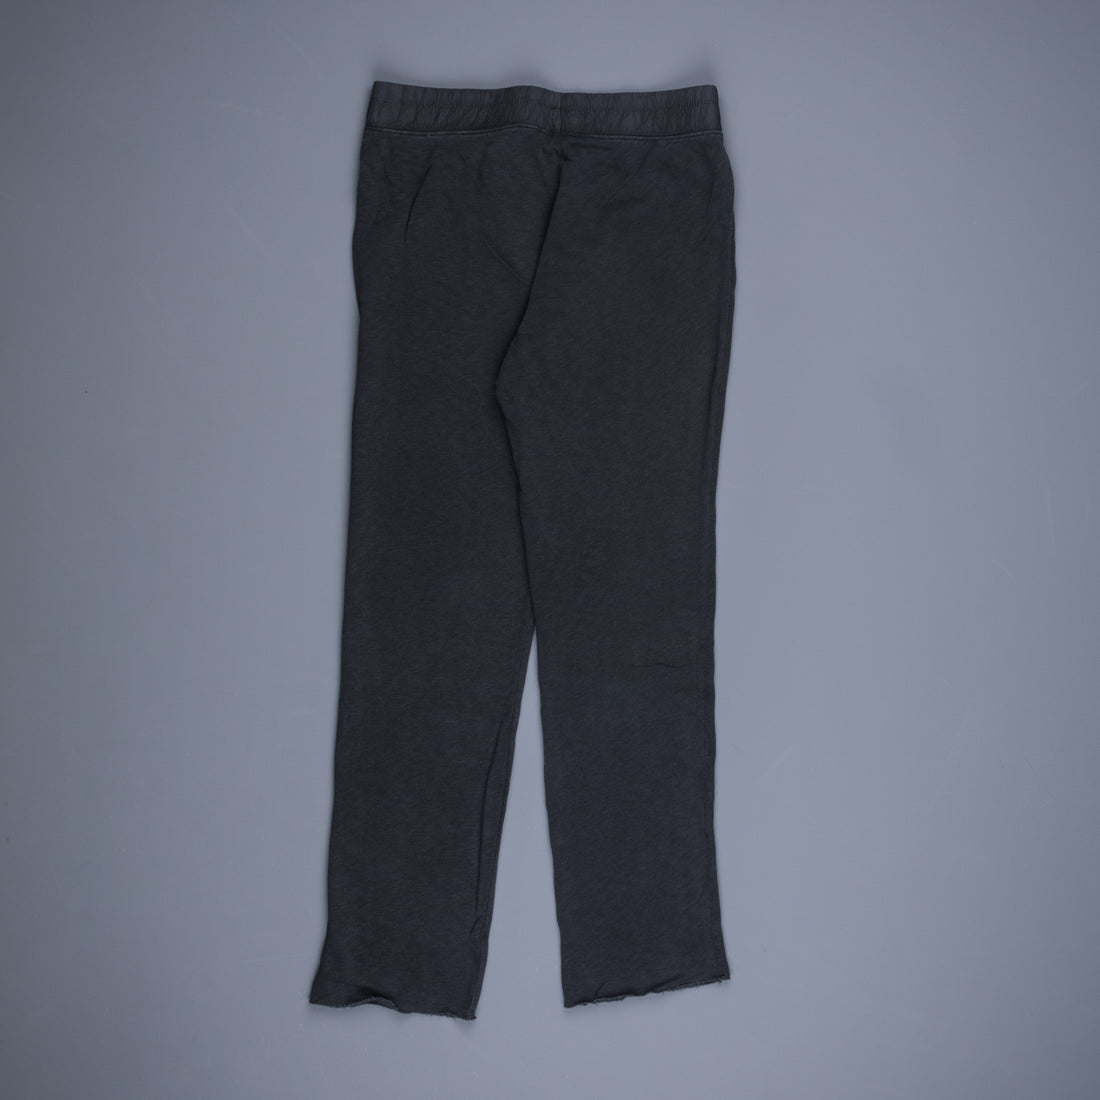 James Perse French Terry Sweat Pants Carbon